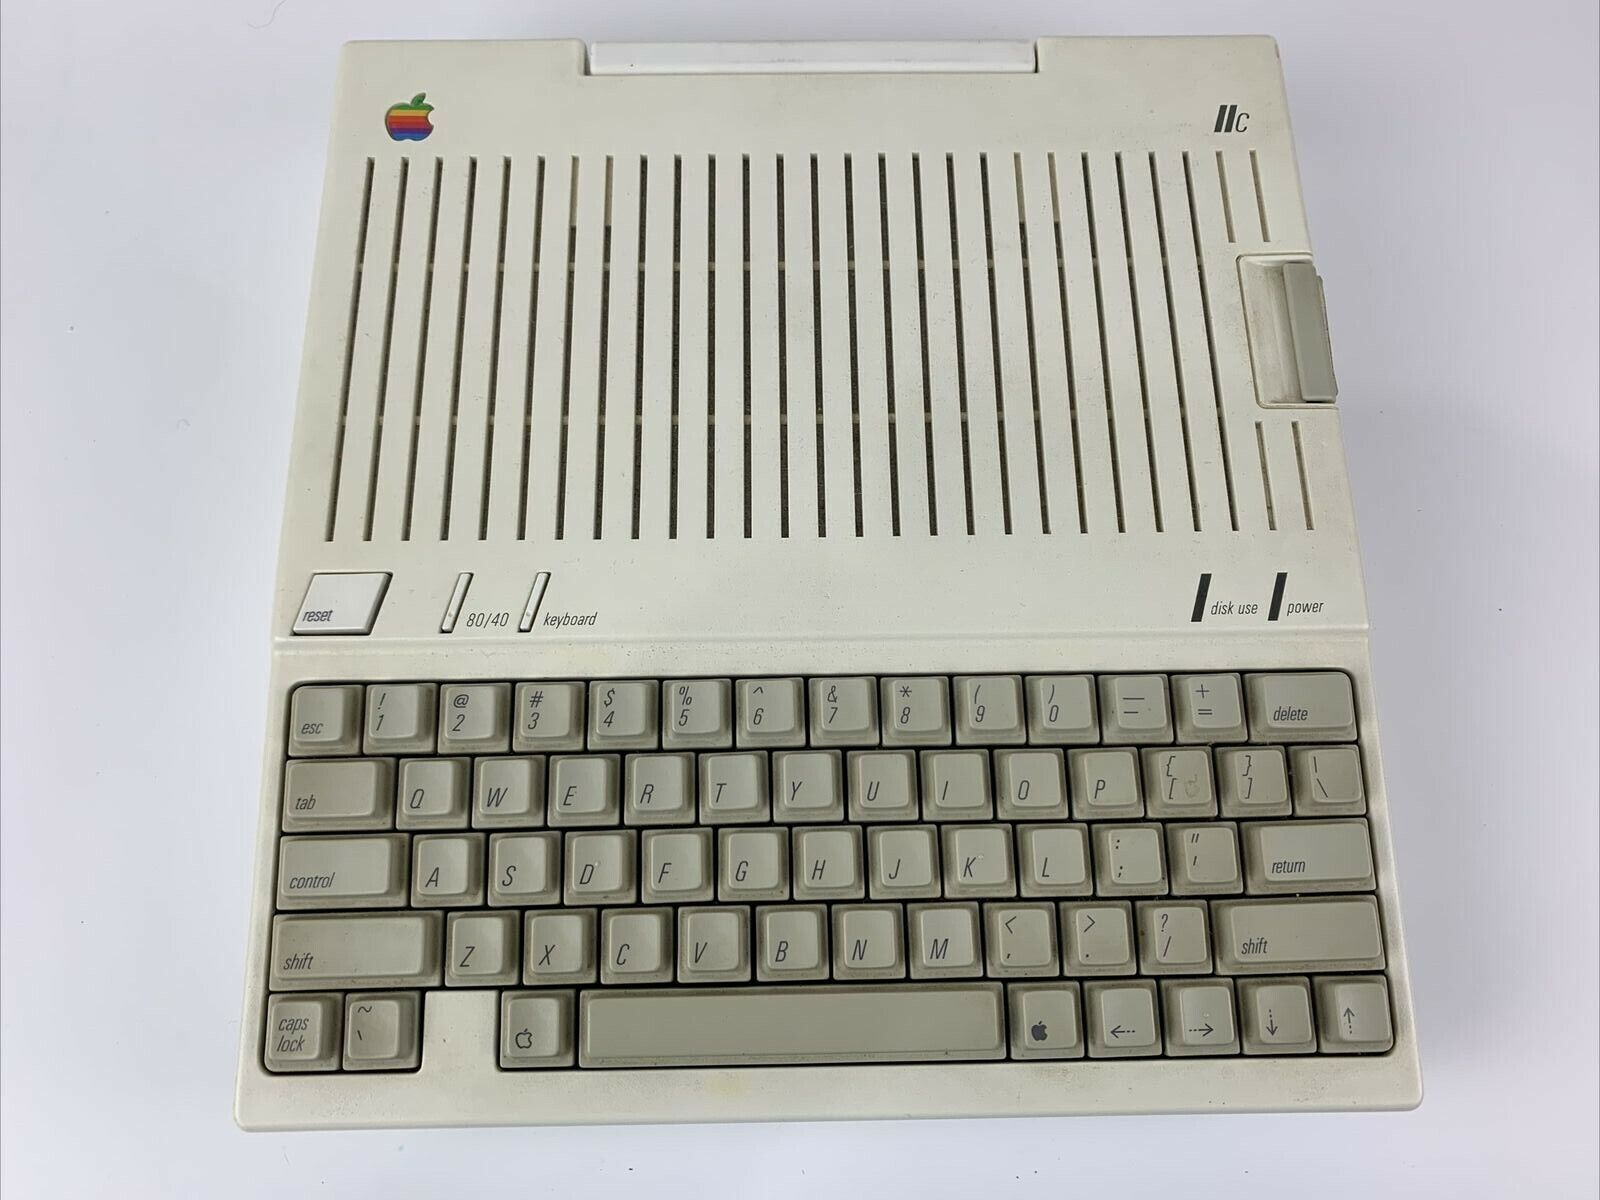 Apple IIc A2S4000 Vintage Portable Computer Not Tested Original Packing Material